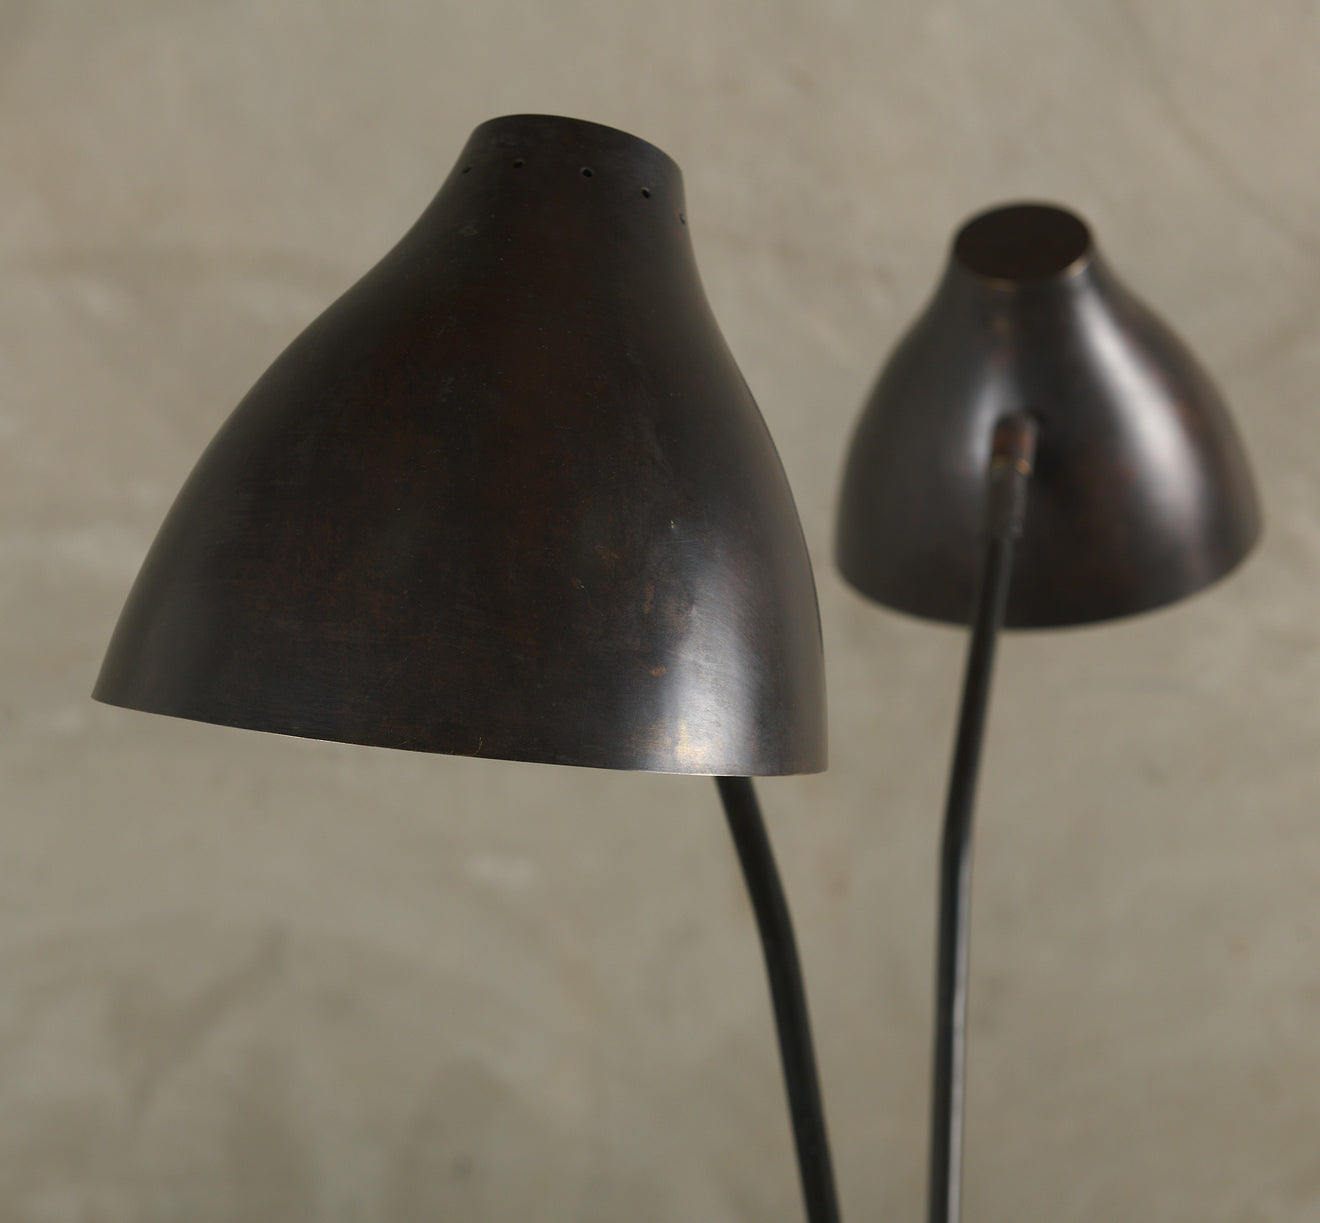 TROIG FLOOR LAMP BY THIERRY JEANNOT